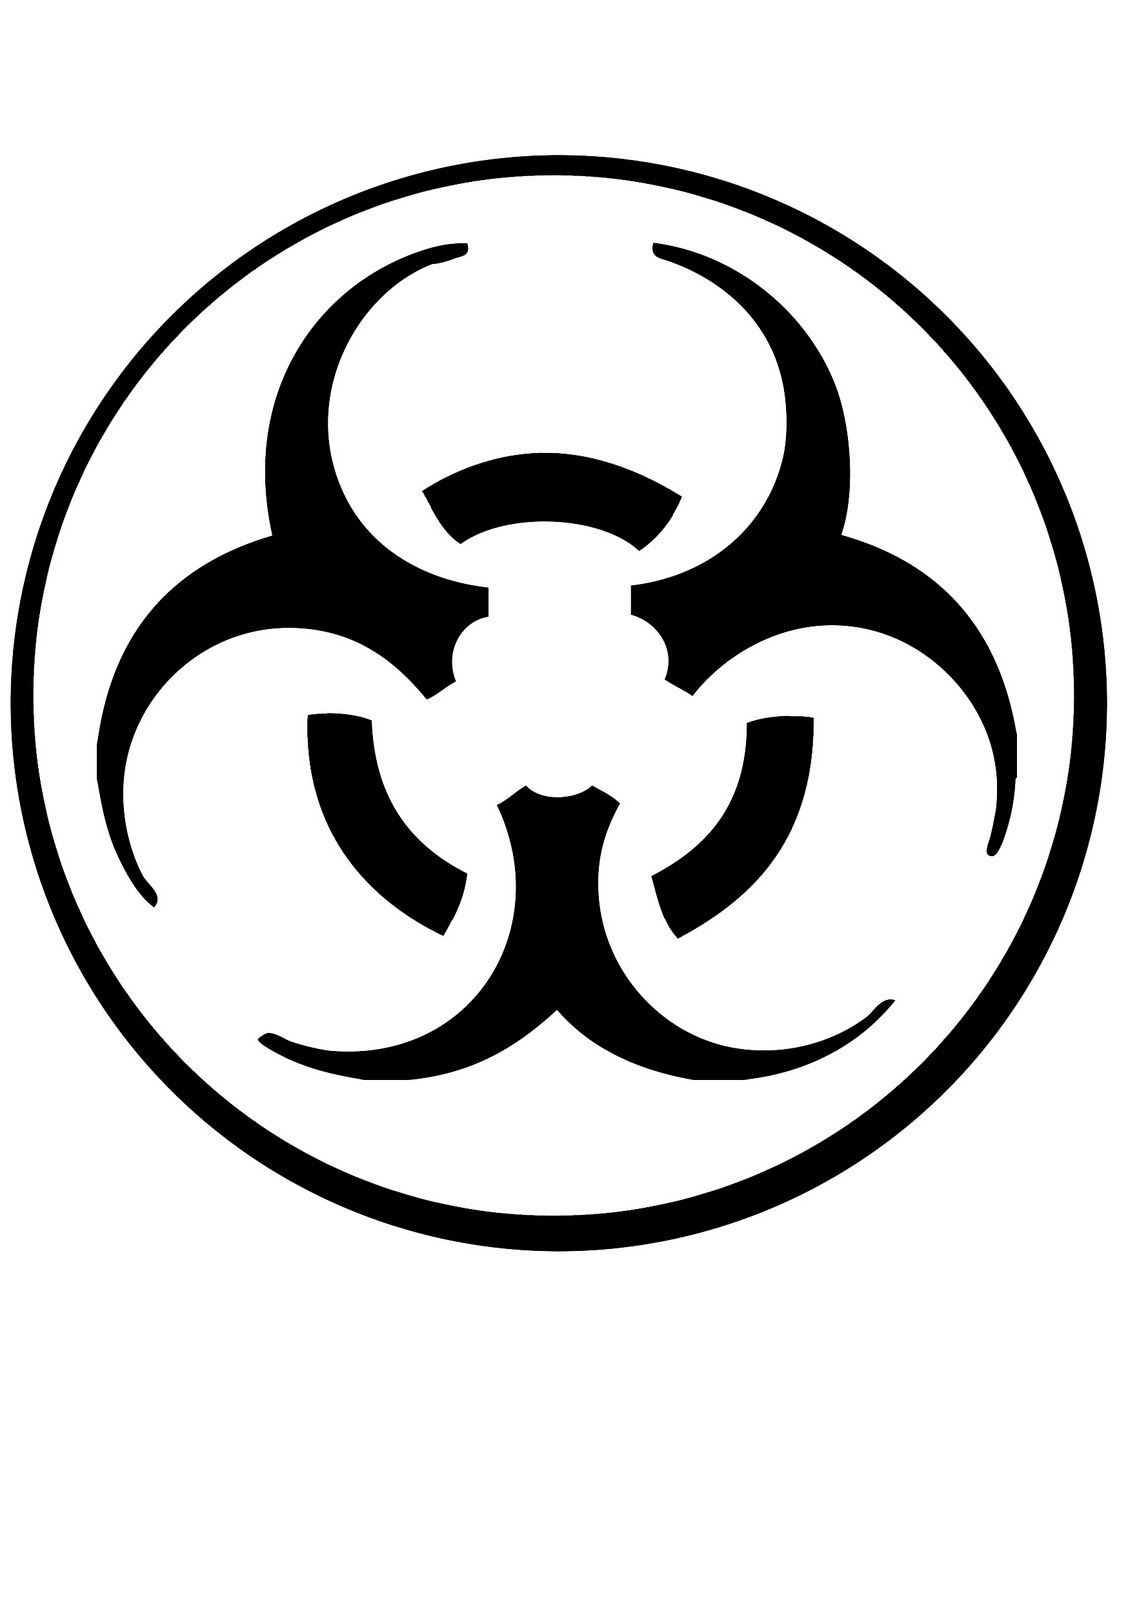 Images For > Biohazard Sign